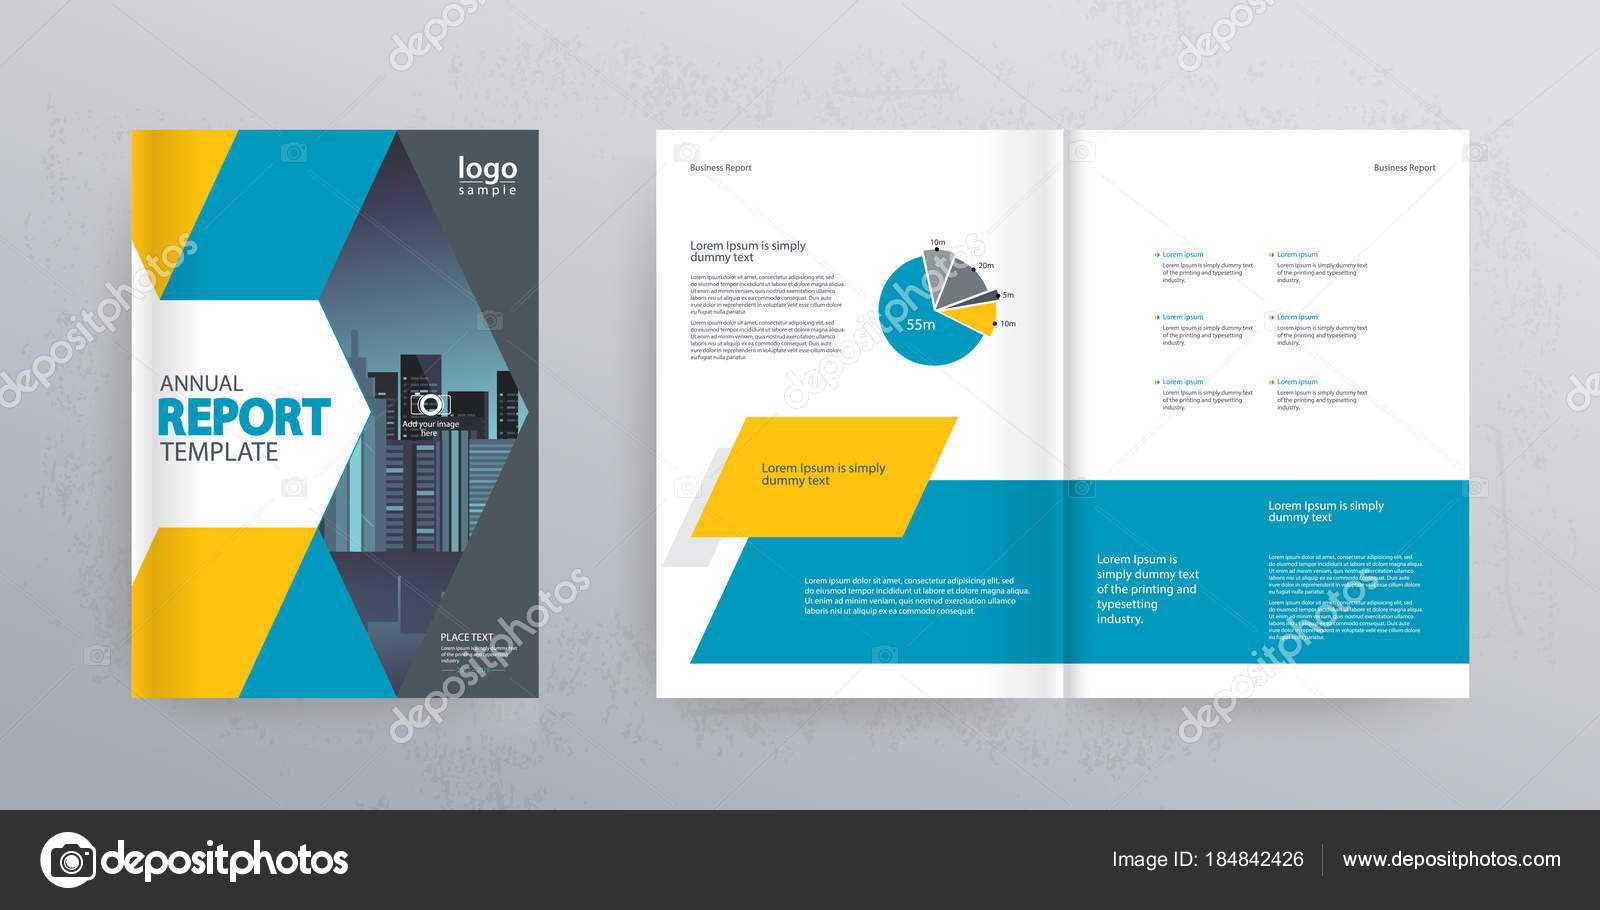 Template Layout Design Cover Page Company Profile Annual Regarding Cover Page For Annual Report Template